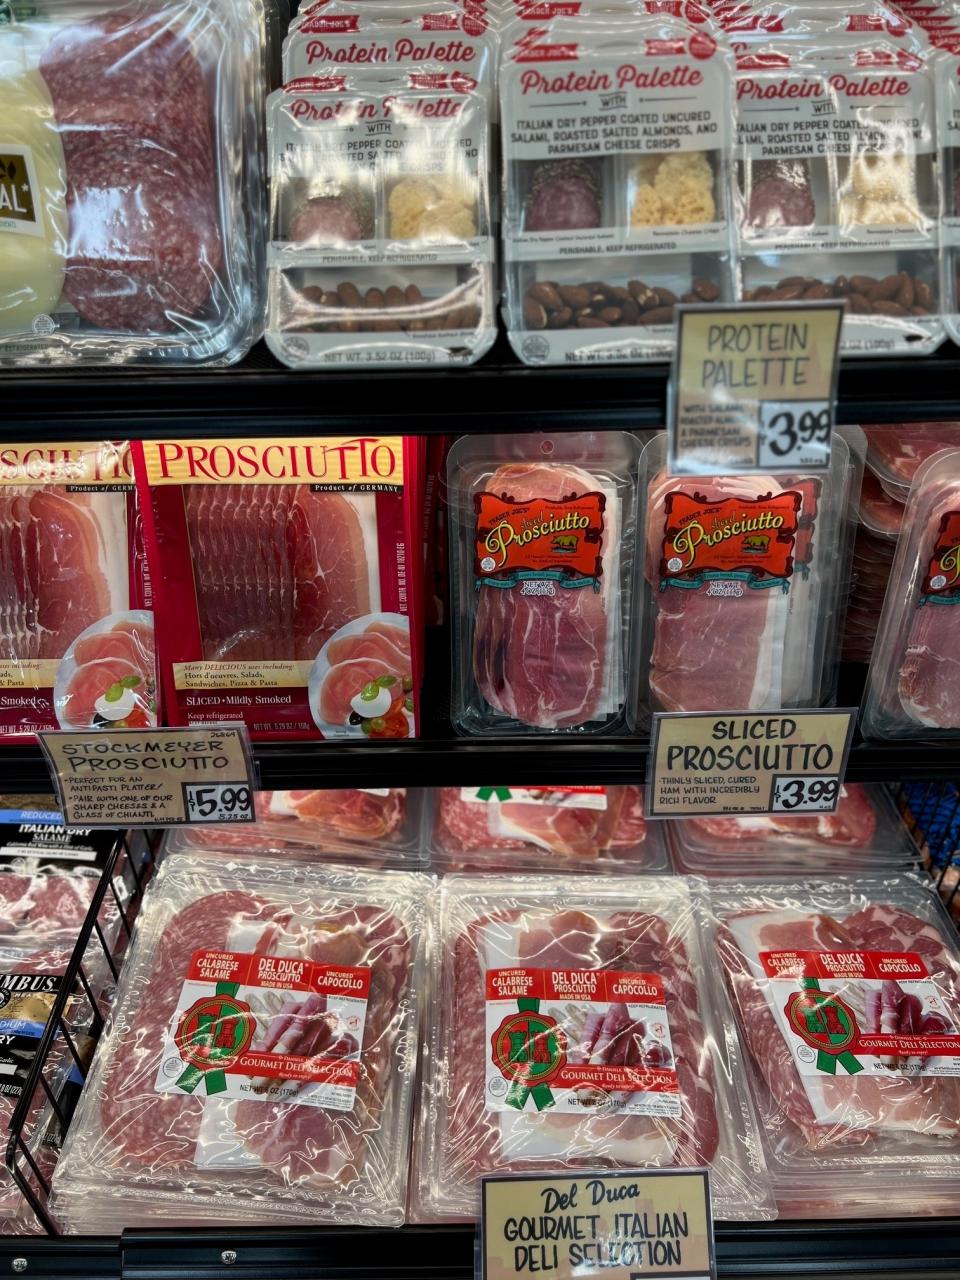 Refrigerated display with various packaged meats including prosciutto and Protein Palette snack boxes